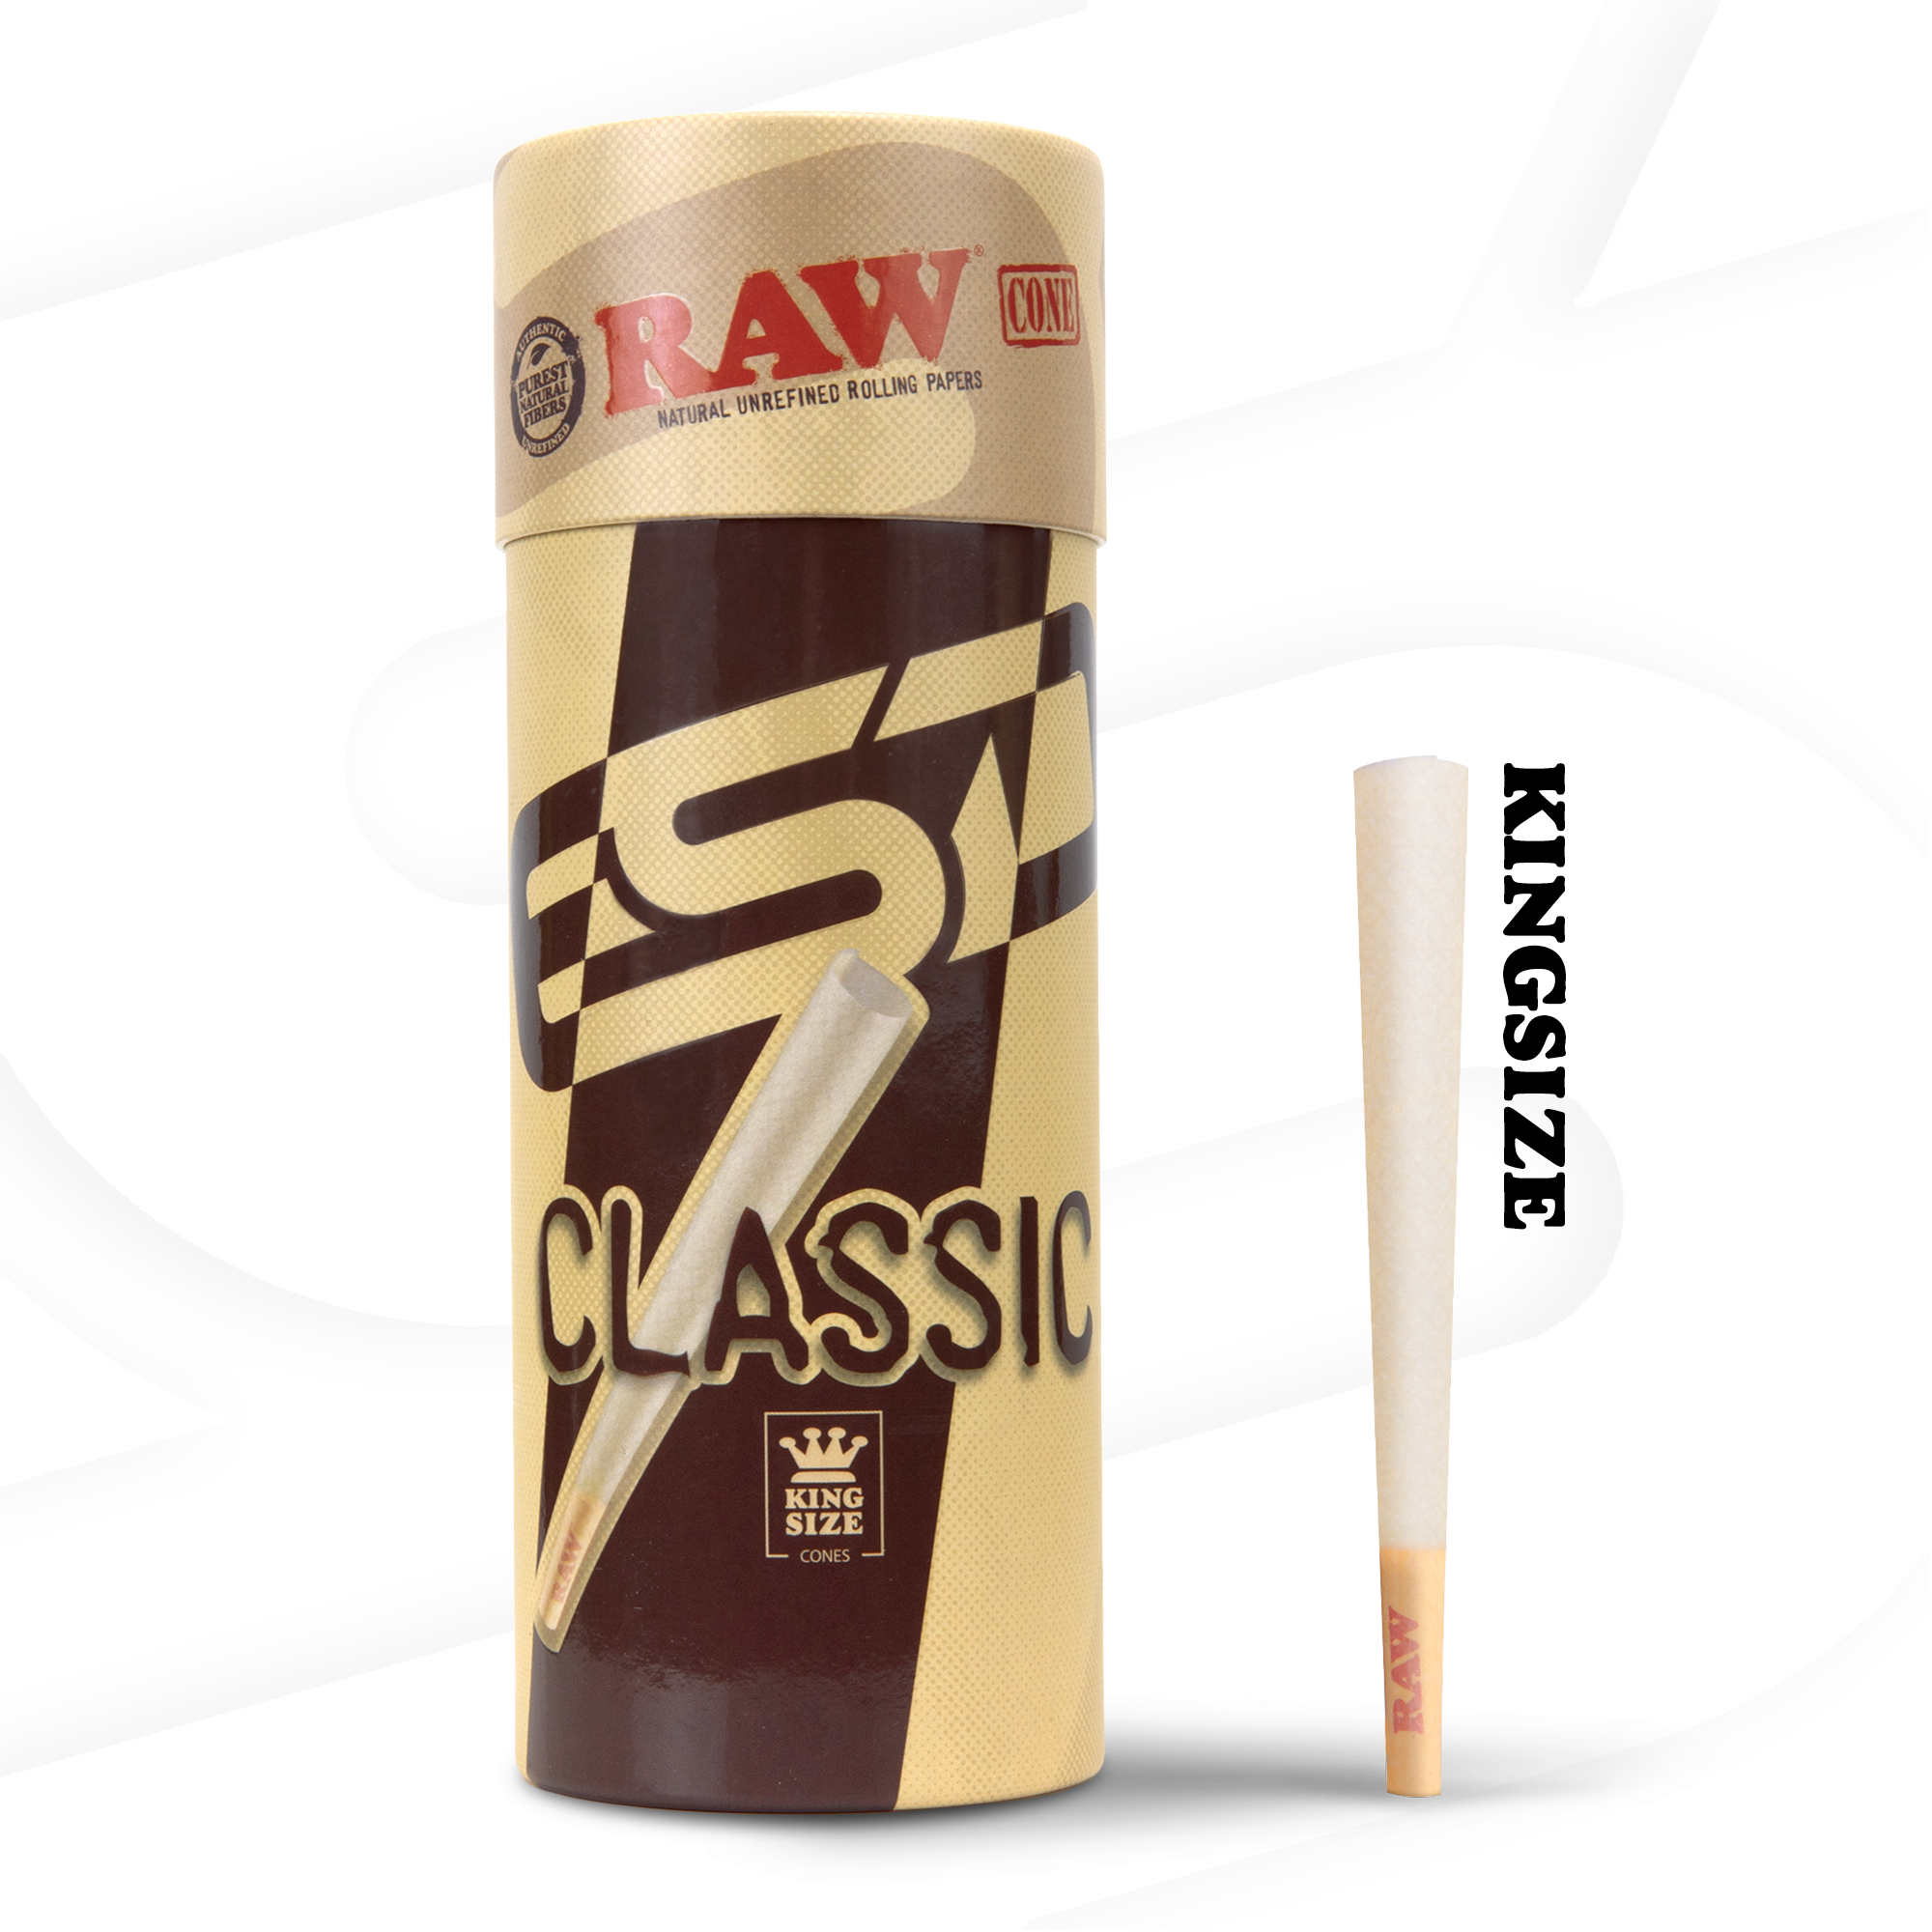 Buy *RAW X ESD Classic King Size Cones Online